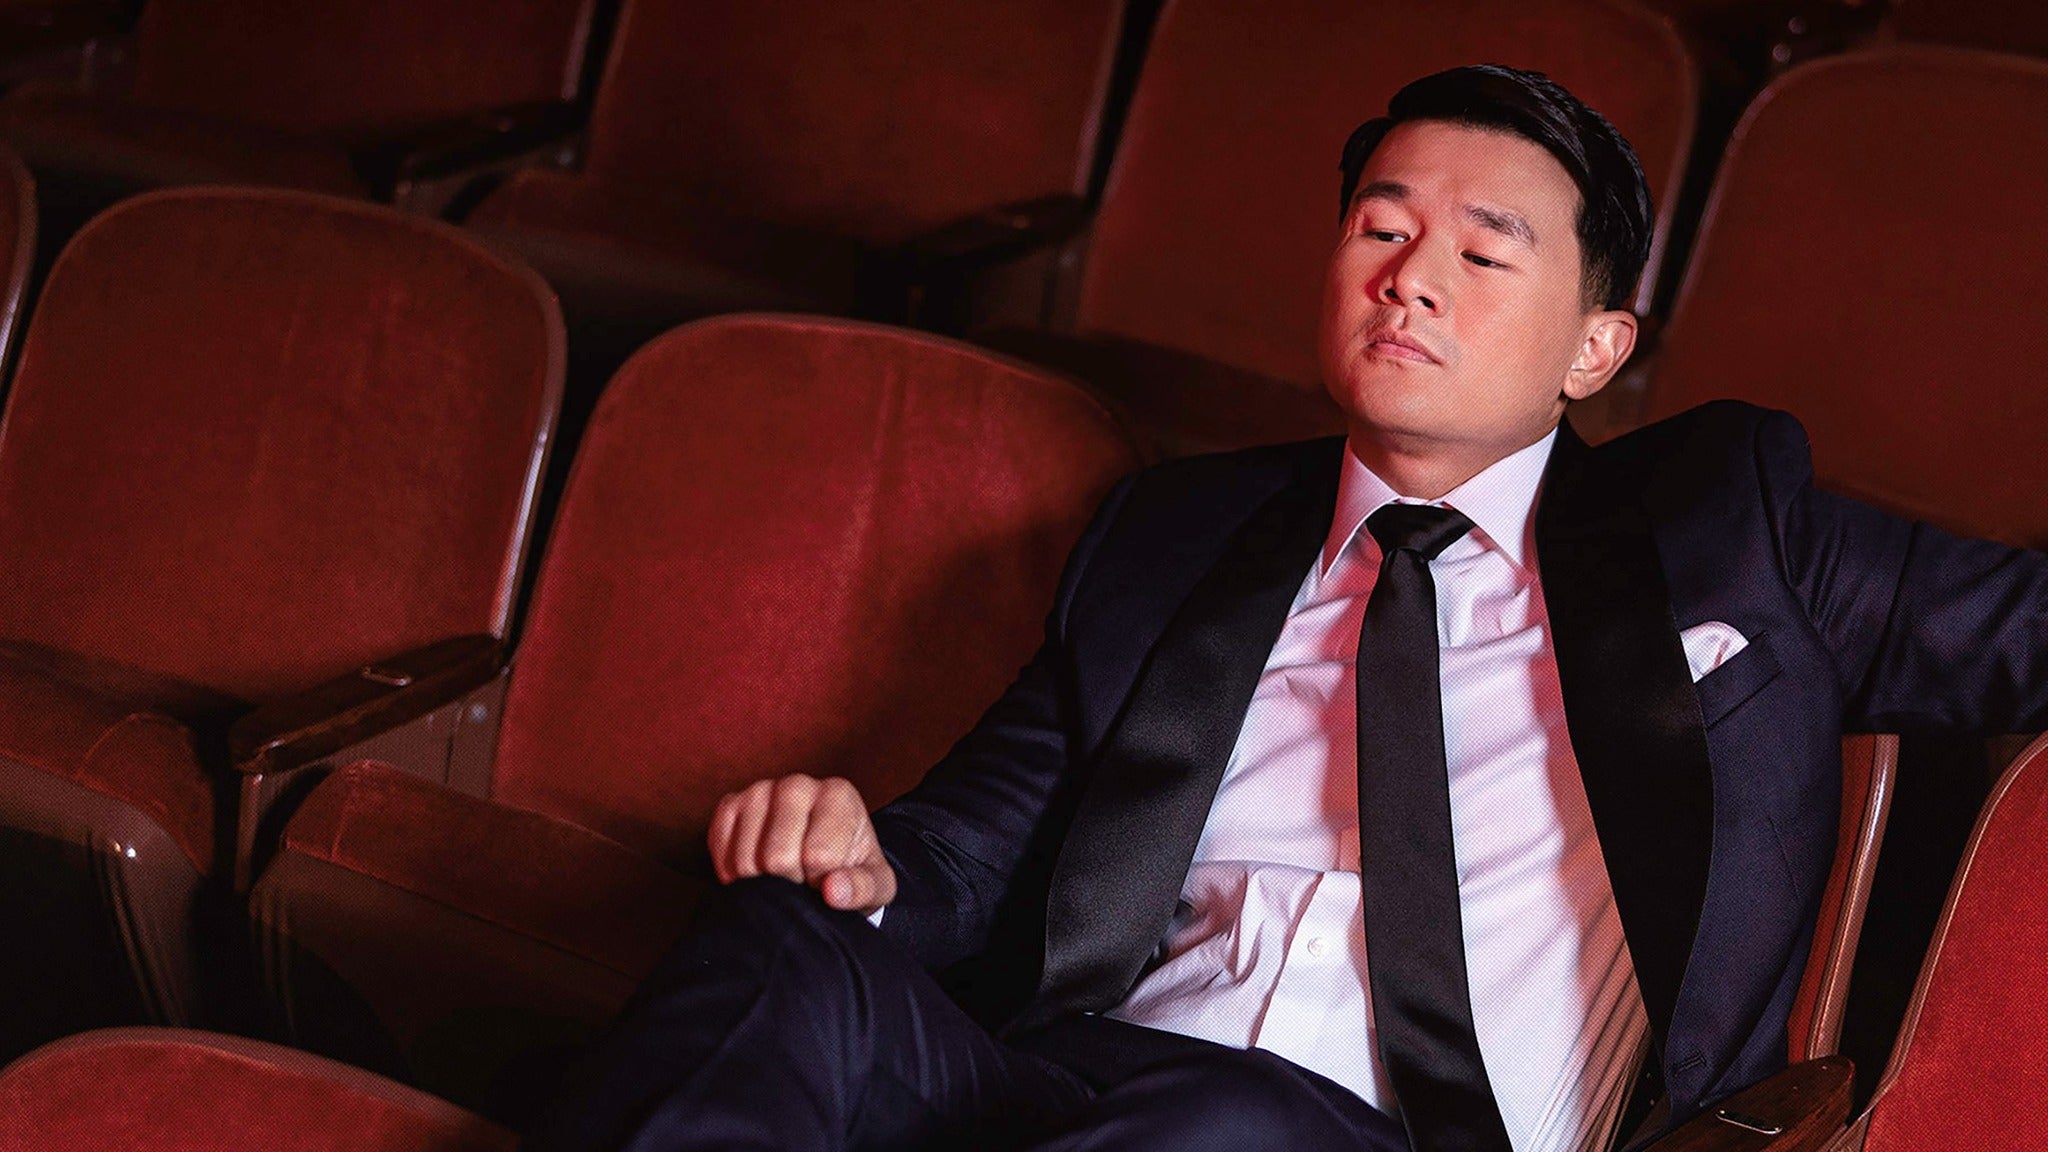 Ronny Chieng: The Hope You Get Rich Tour pre-sale code for early tickets in San Diego